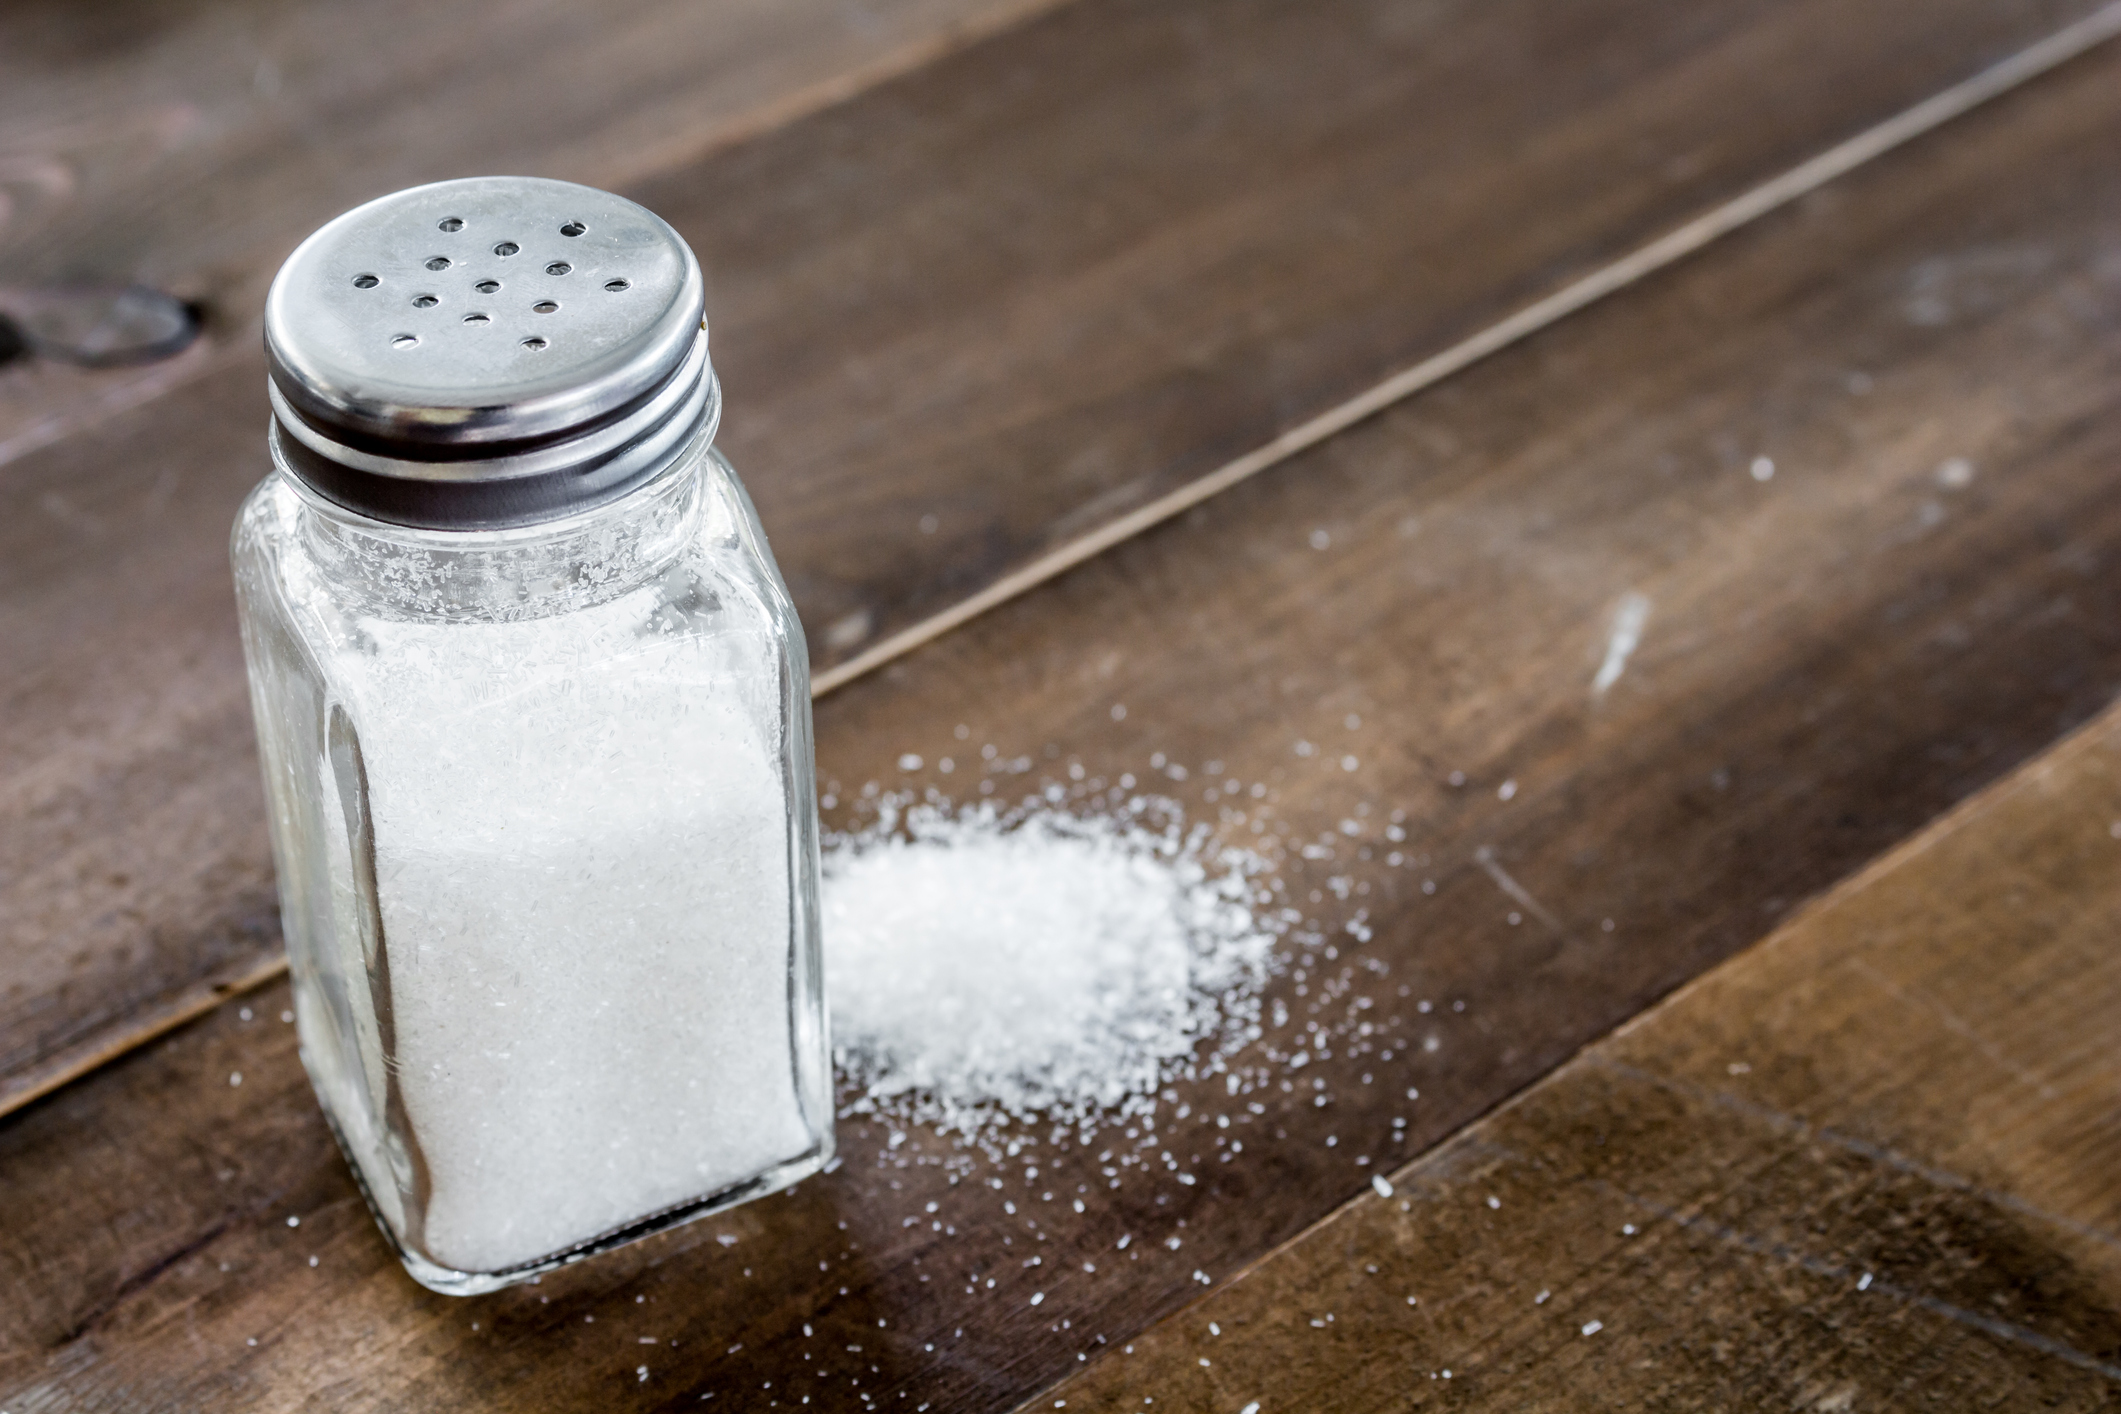 The main source of chloride in food is sodium chloride, known as common table salt.